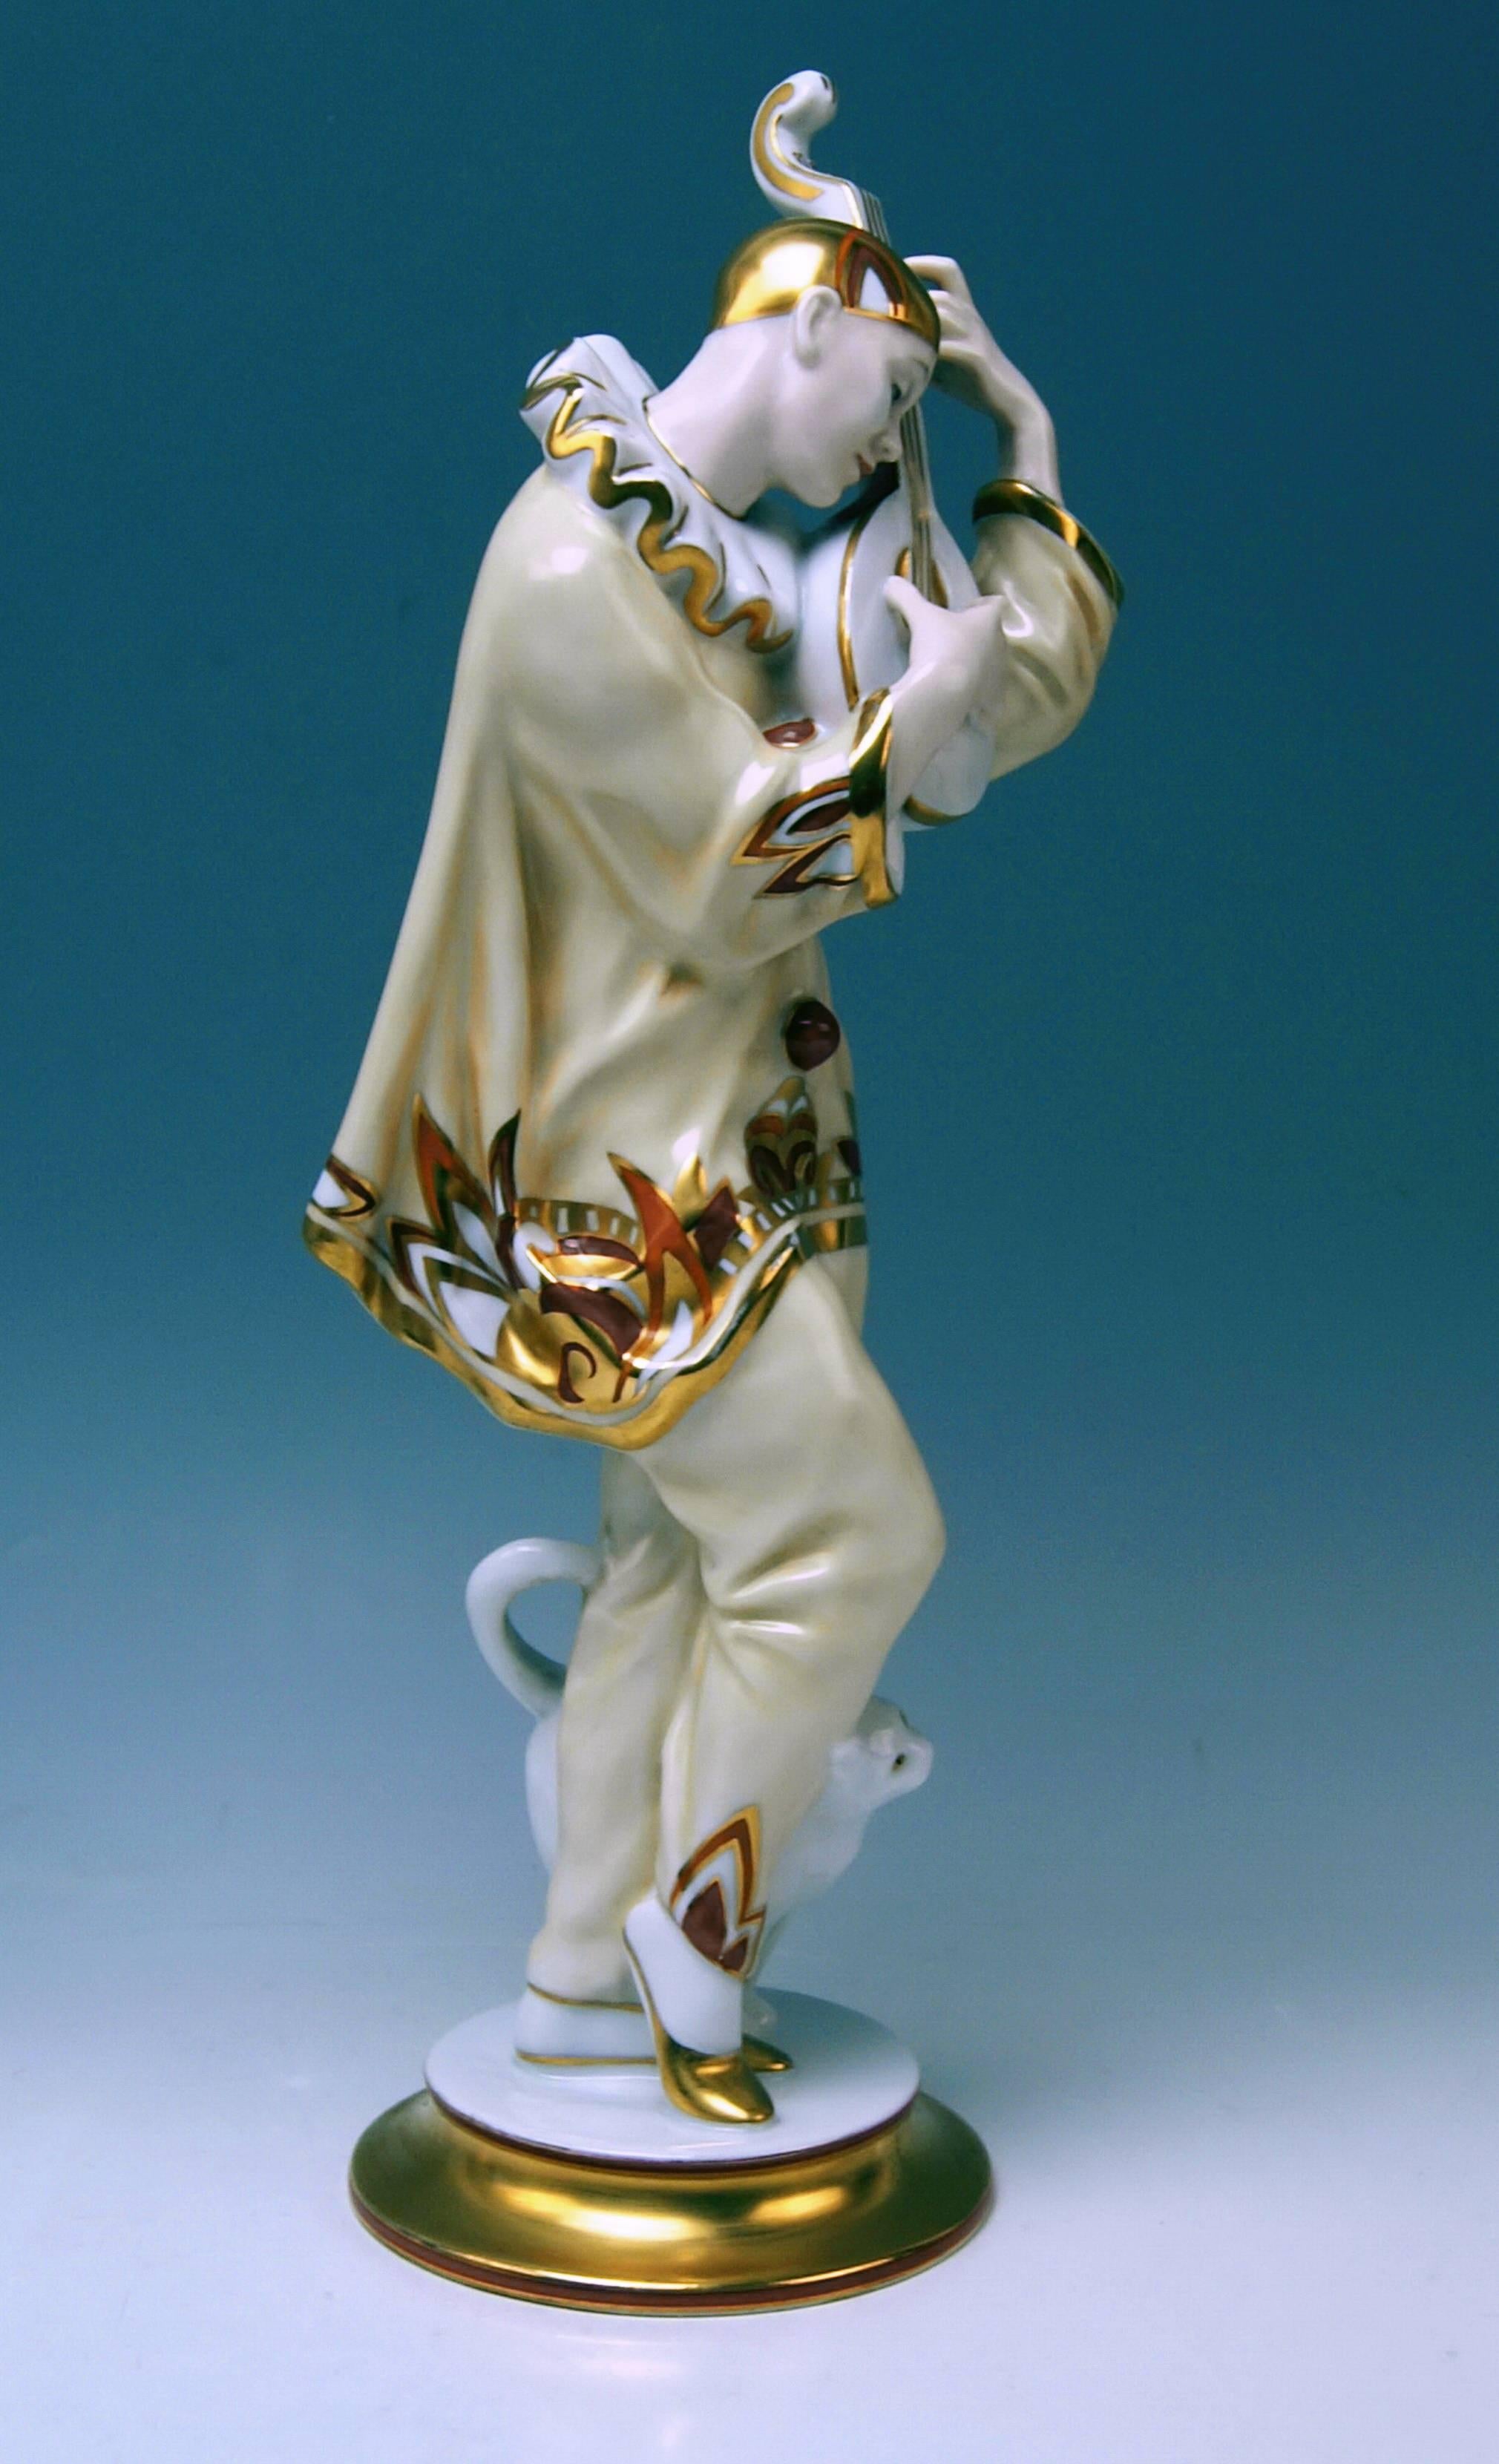 Rosenthal rarest Art Deco figurine of a Pierrot:
A gorgeous rarest figurine - called 'Ash Wednesday' wearing a Pierrot's costume (ruff, cap, a loose-fit shirt and trousers) plays the lute / a lovely cat nuzzles up against Pierrot's legs. The